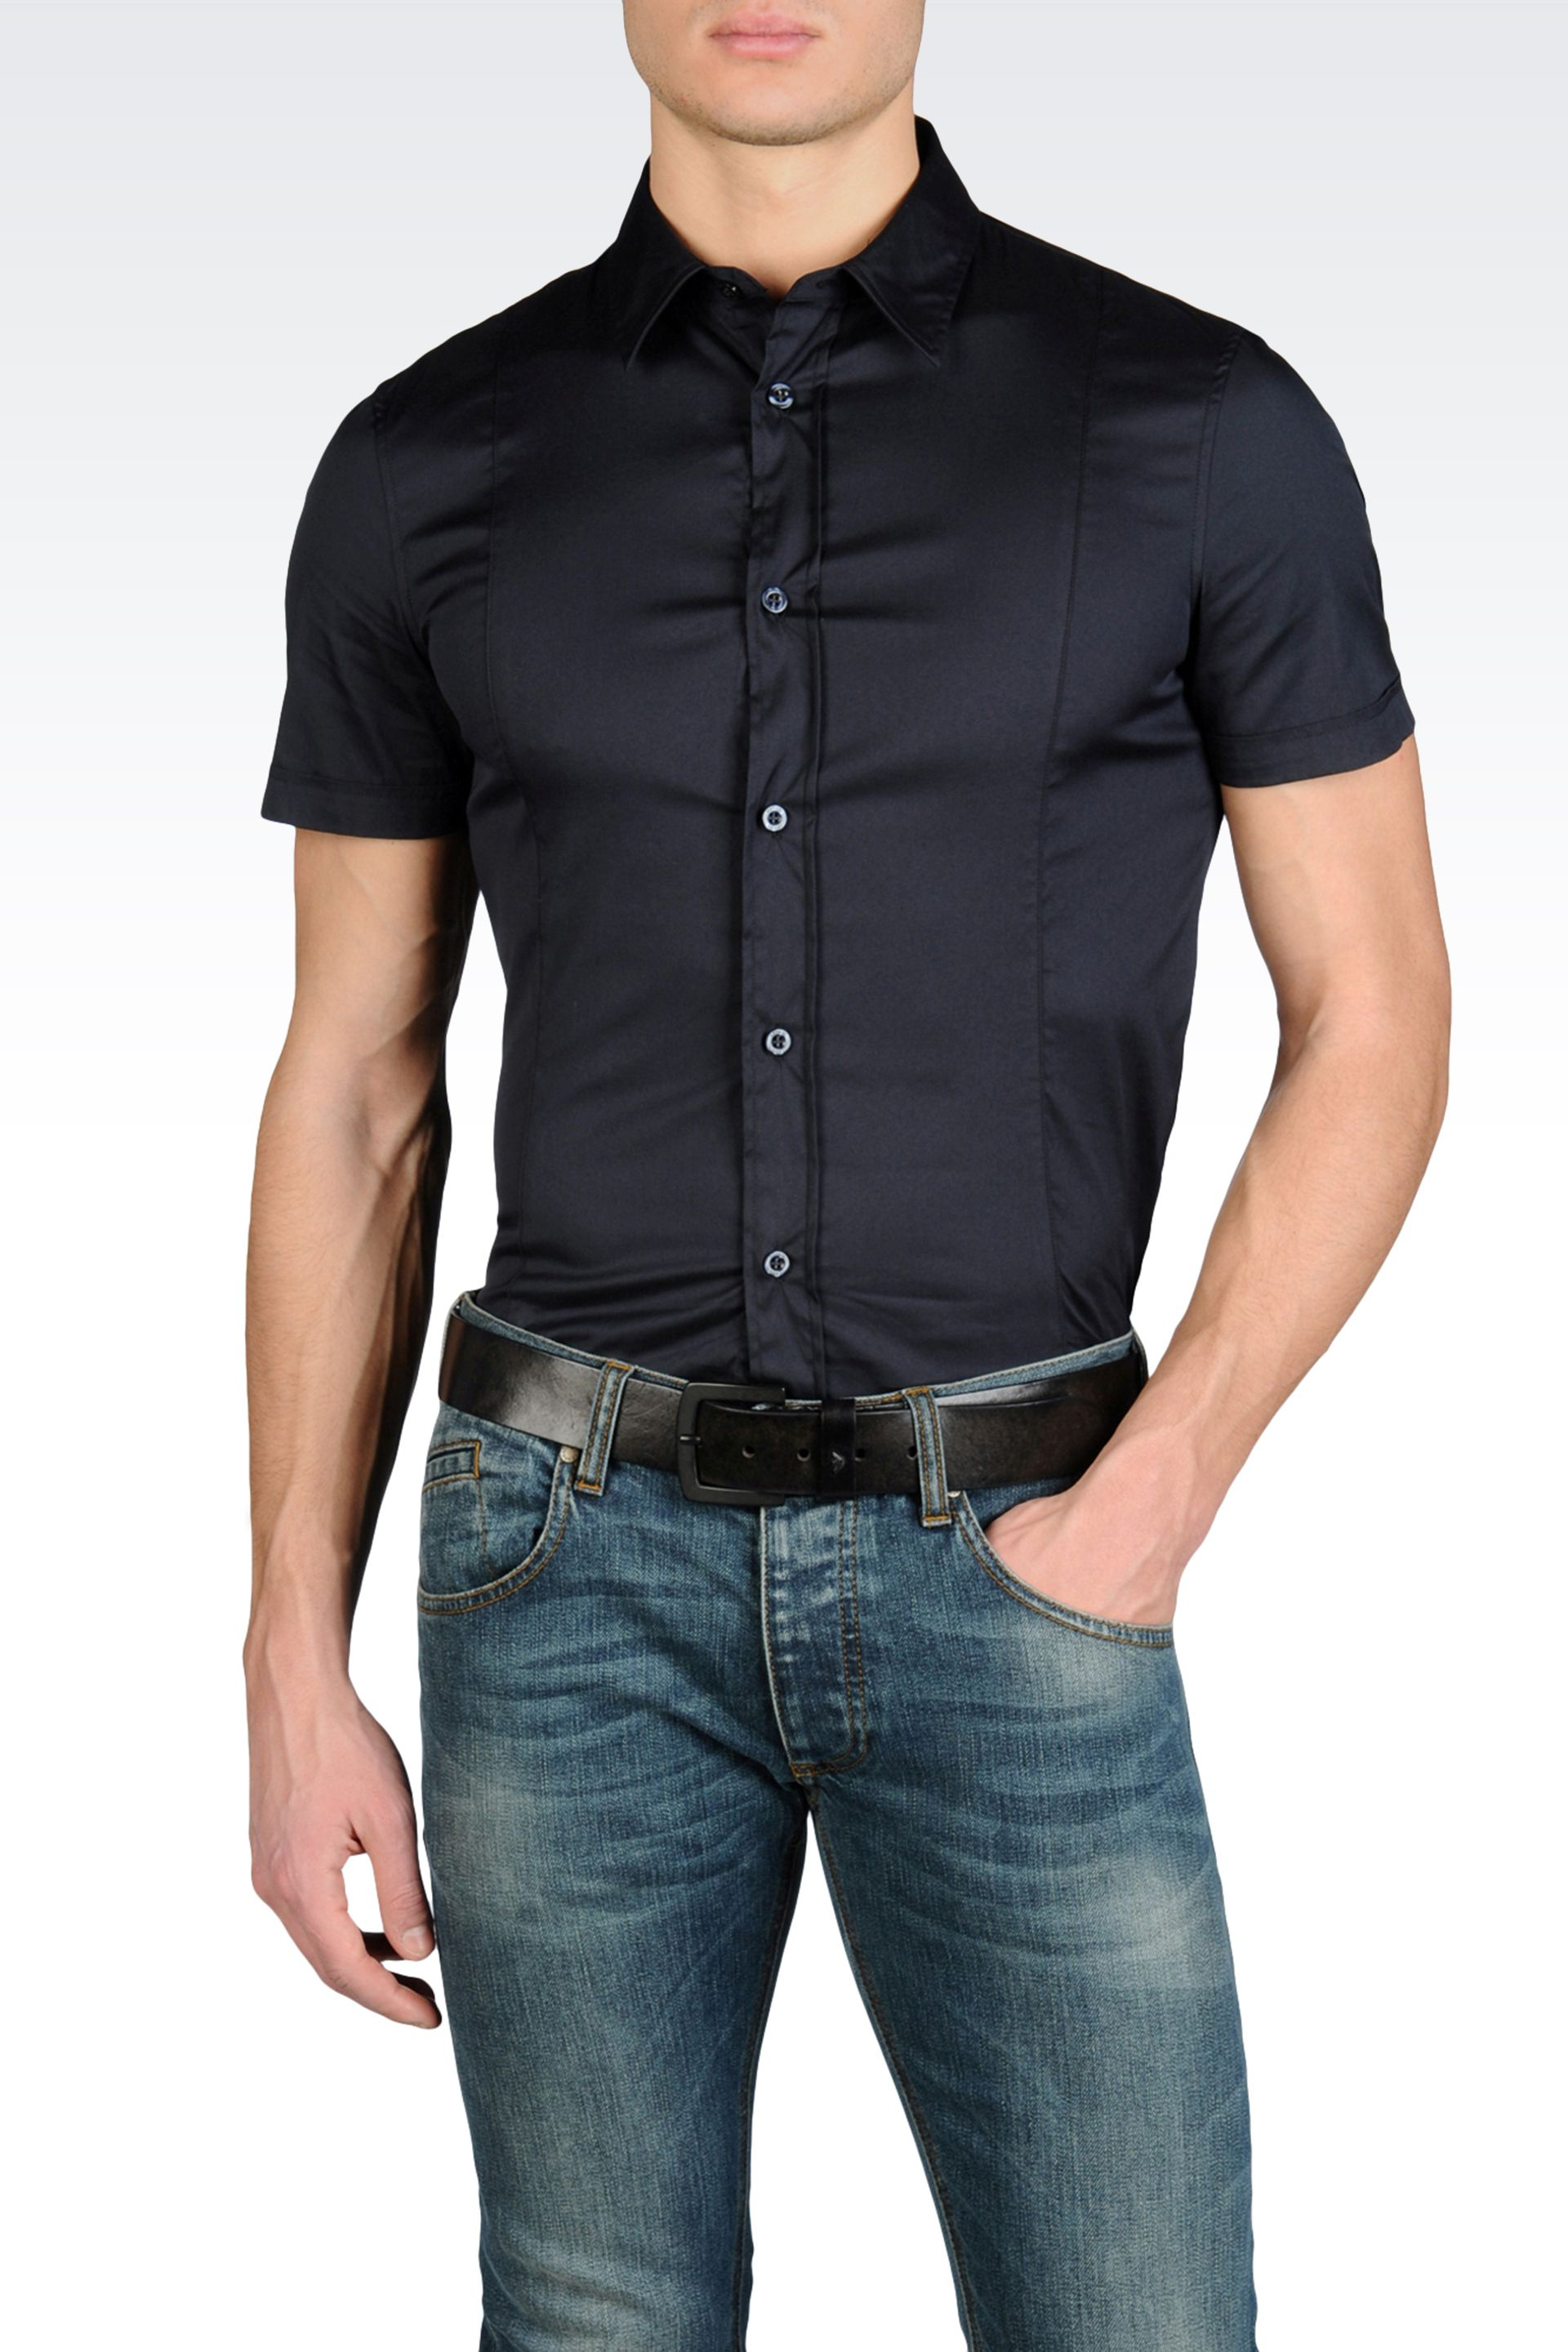 Lyst - Armani jeans Short Sleeve Shirt in Blue for Men